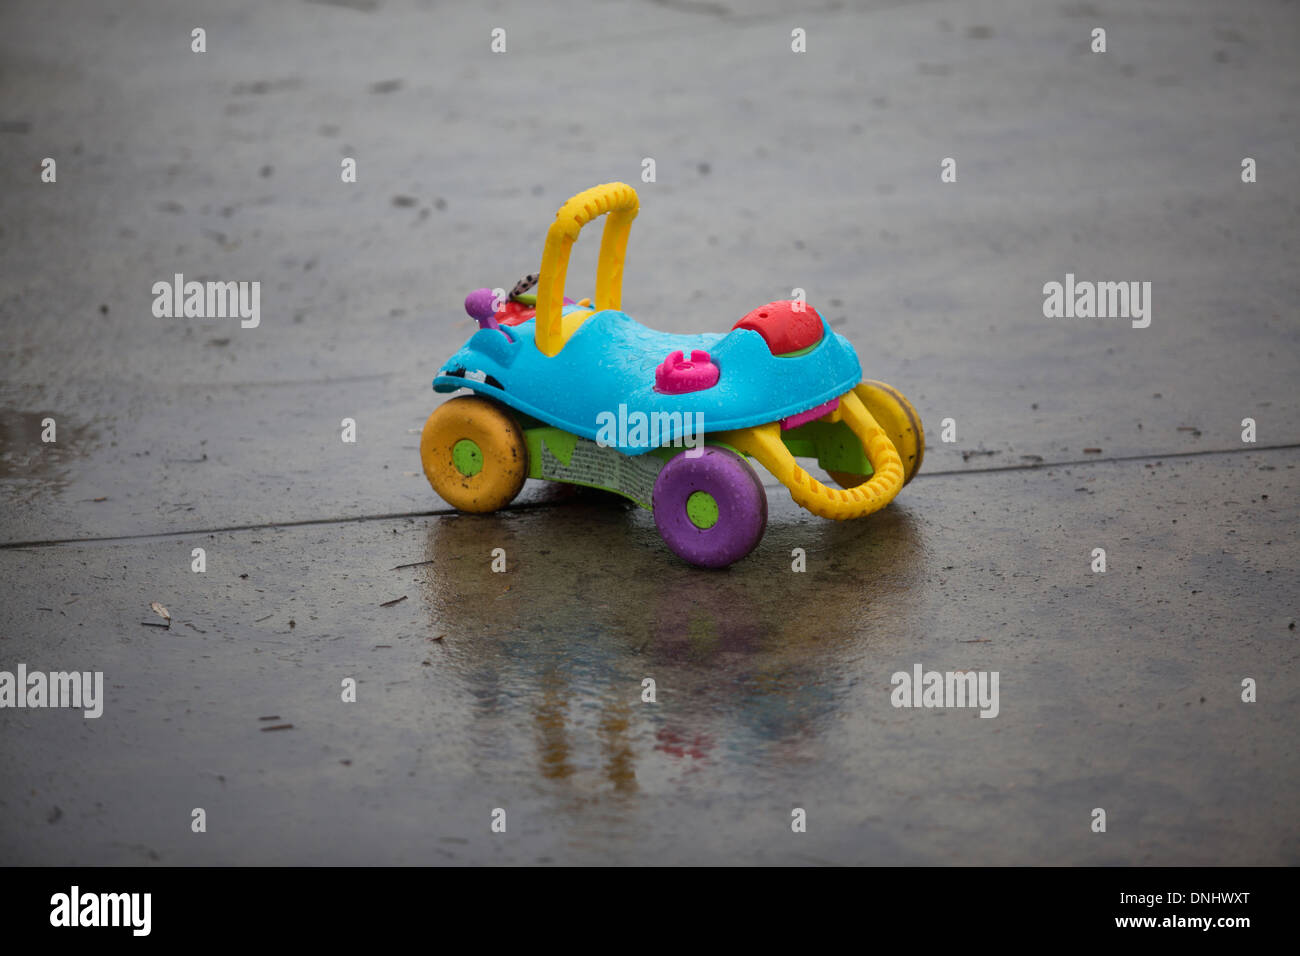 Toy buggy on the wet pavement. Stock Photo